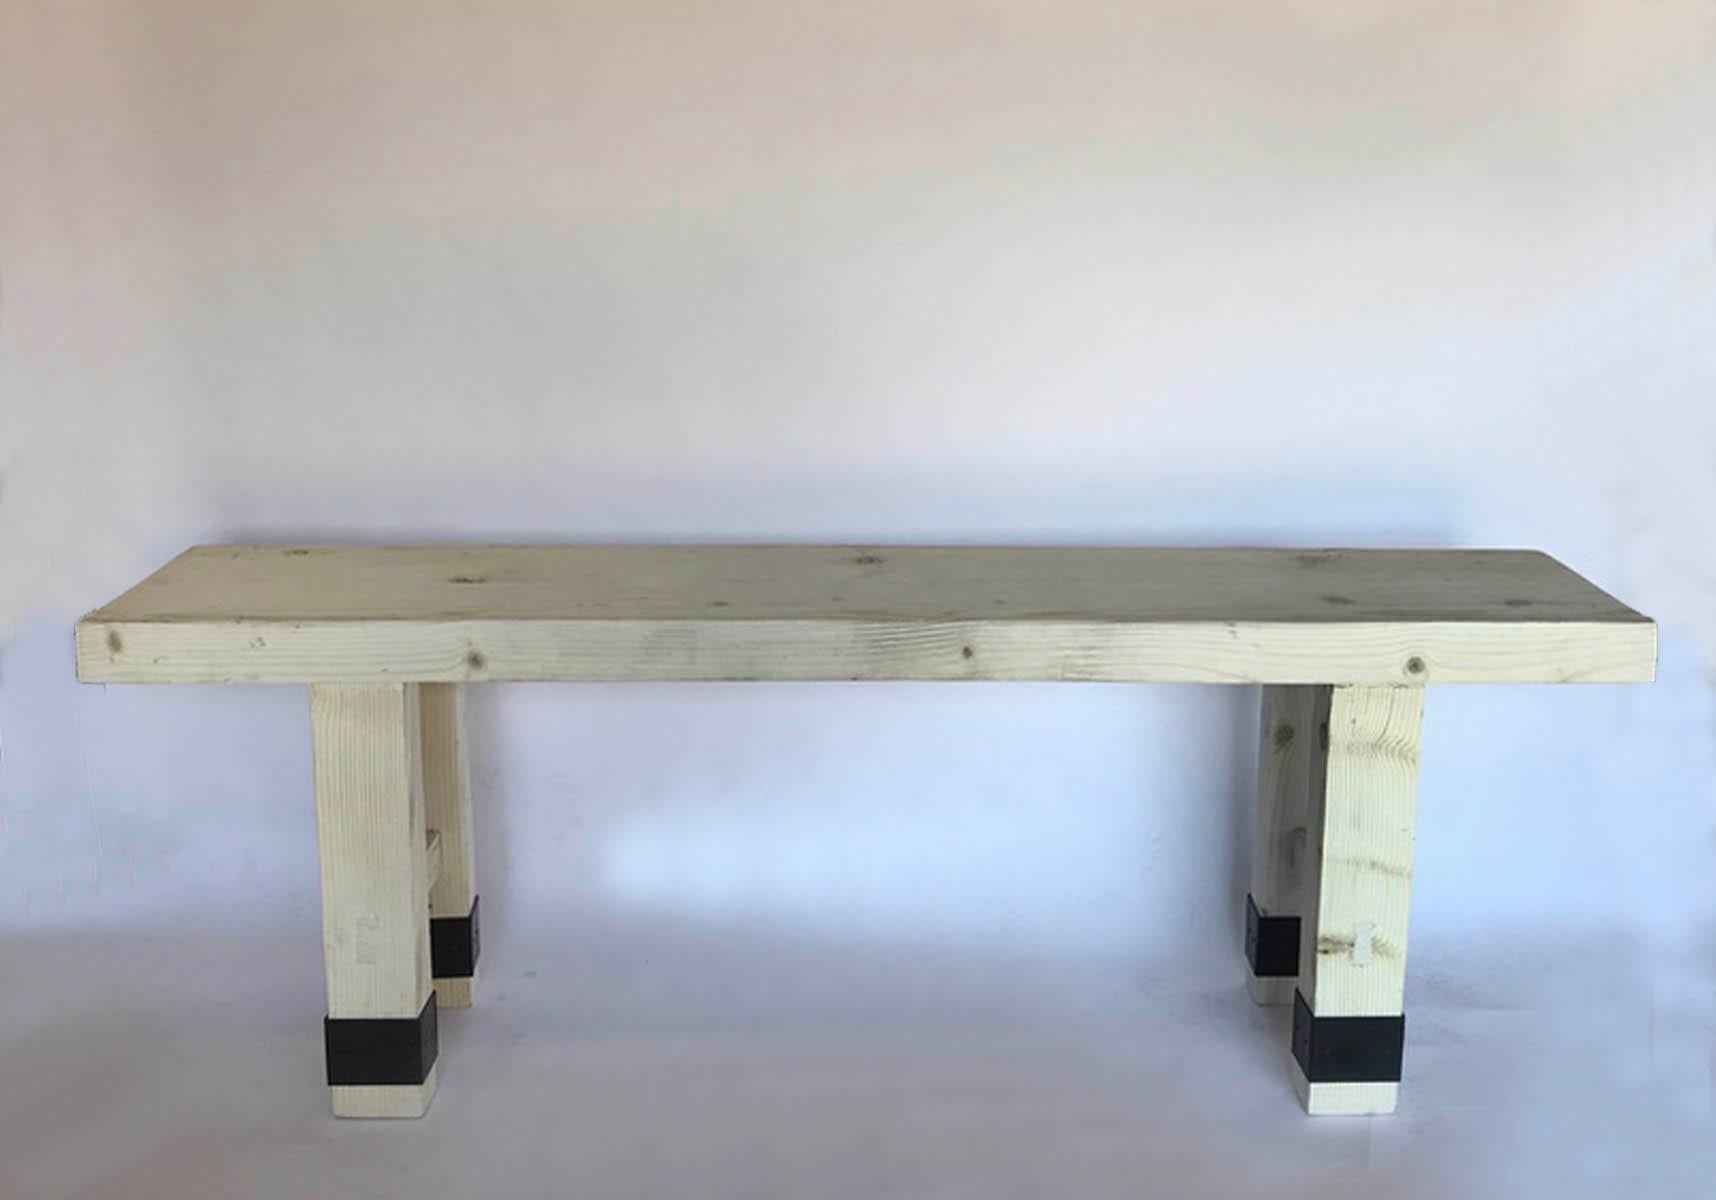 Console made from reclaimed Douglas fir. Bleached finish. Iron banding on legs. 
Can be made in custom sizes and finishes. See color chart. This particular one is available off the floor
Made in Los Angeles by Dos Gallos Studio.